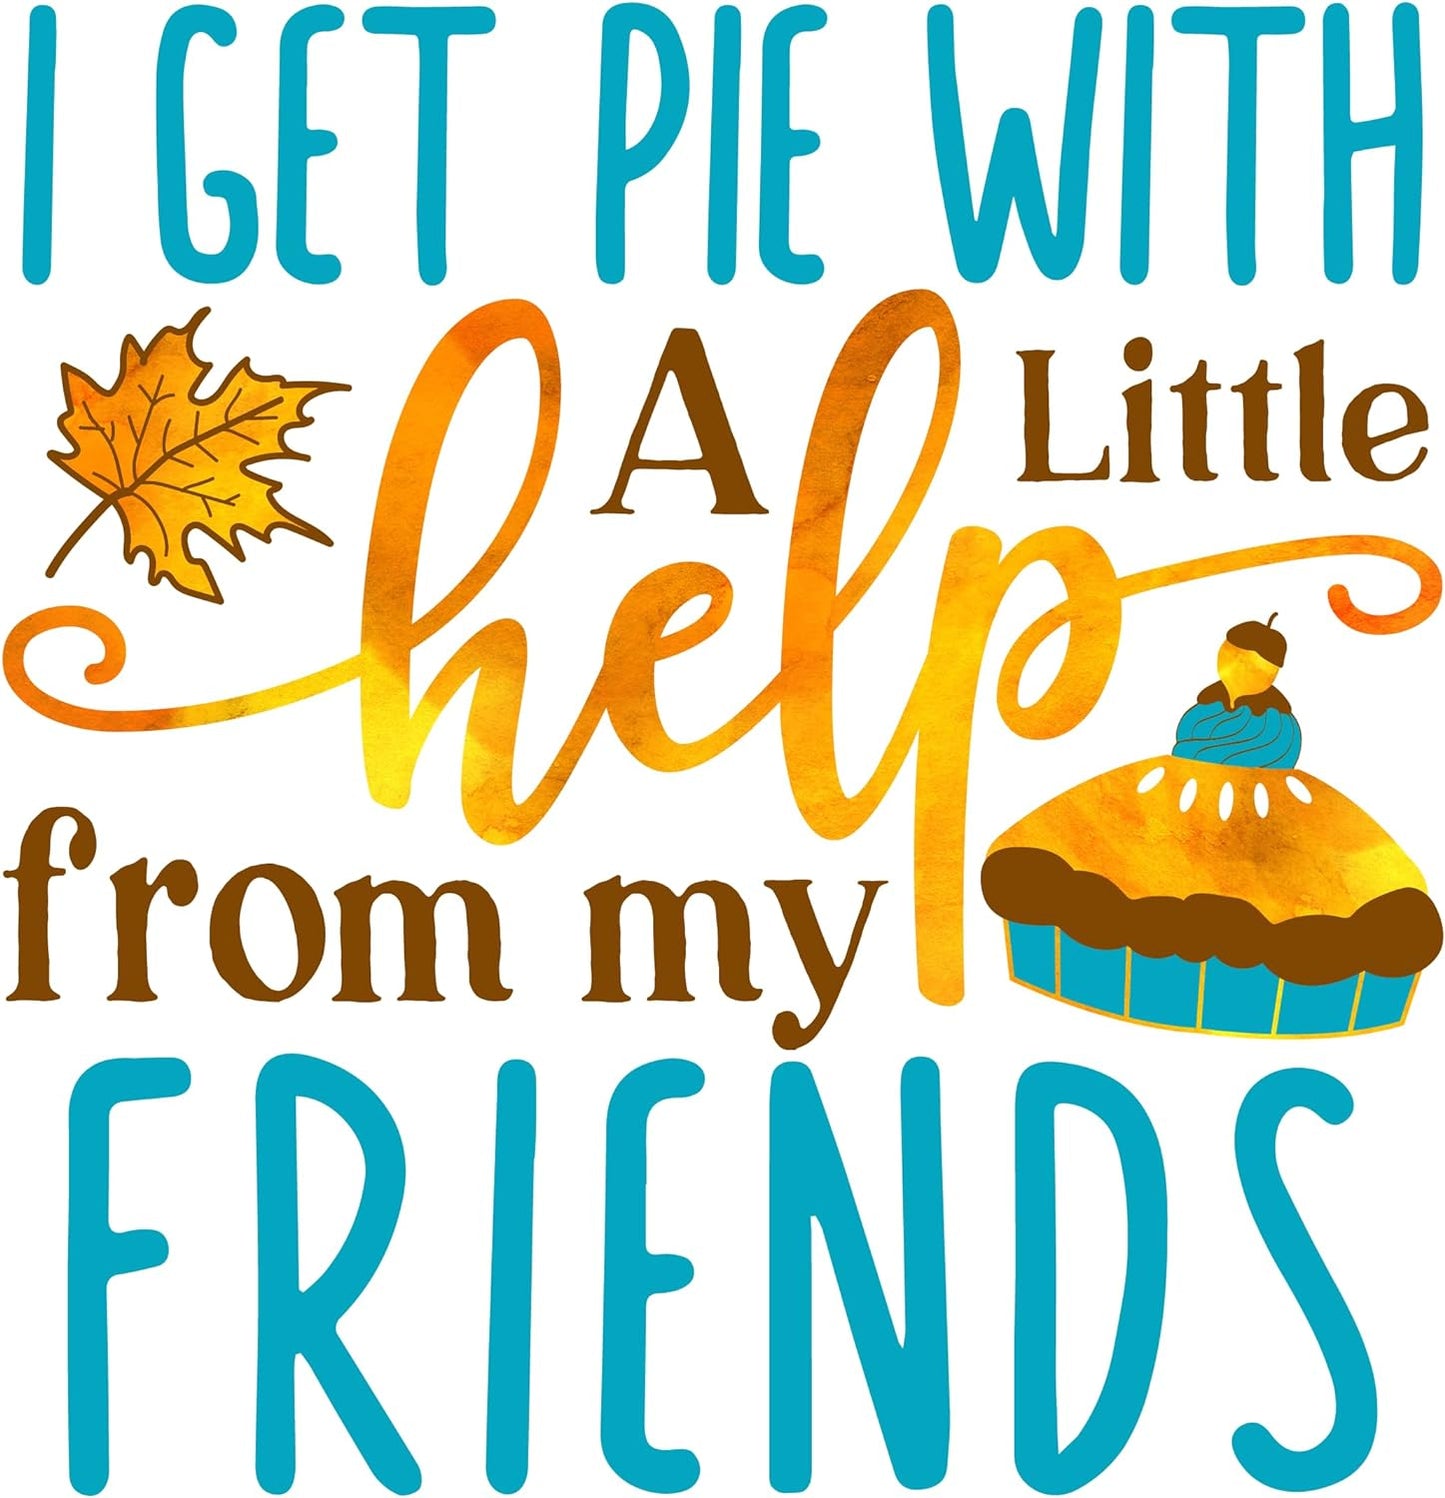 Inspirational Quote I Get Pie With A Little Help From My Friends Motivational Sticker Vinyl Decal Motivation Stickers- 5" Vinyl Sticker Waterproof